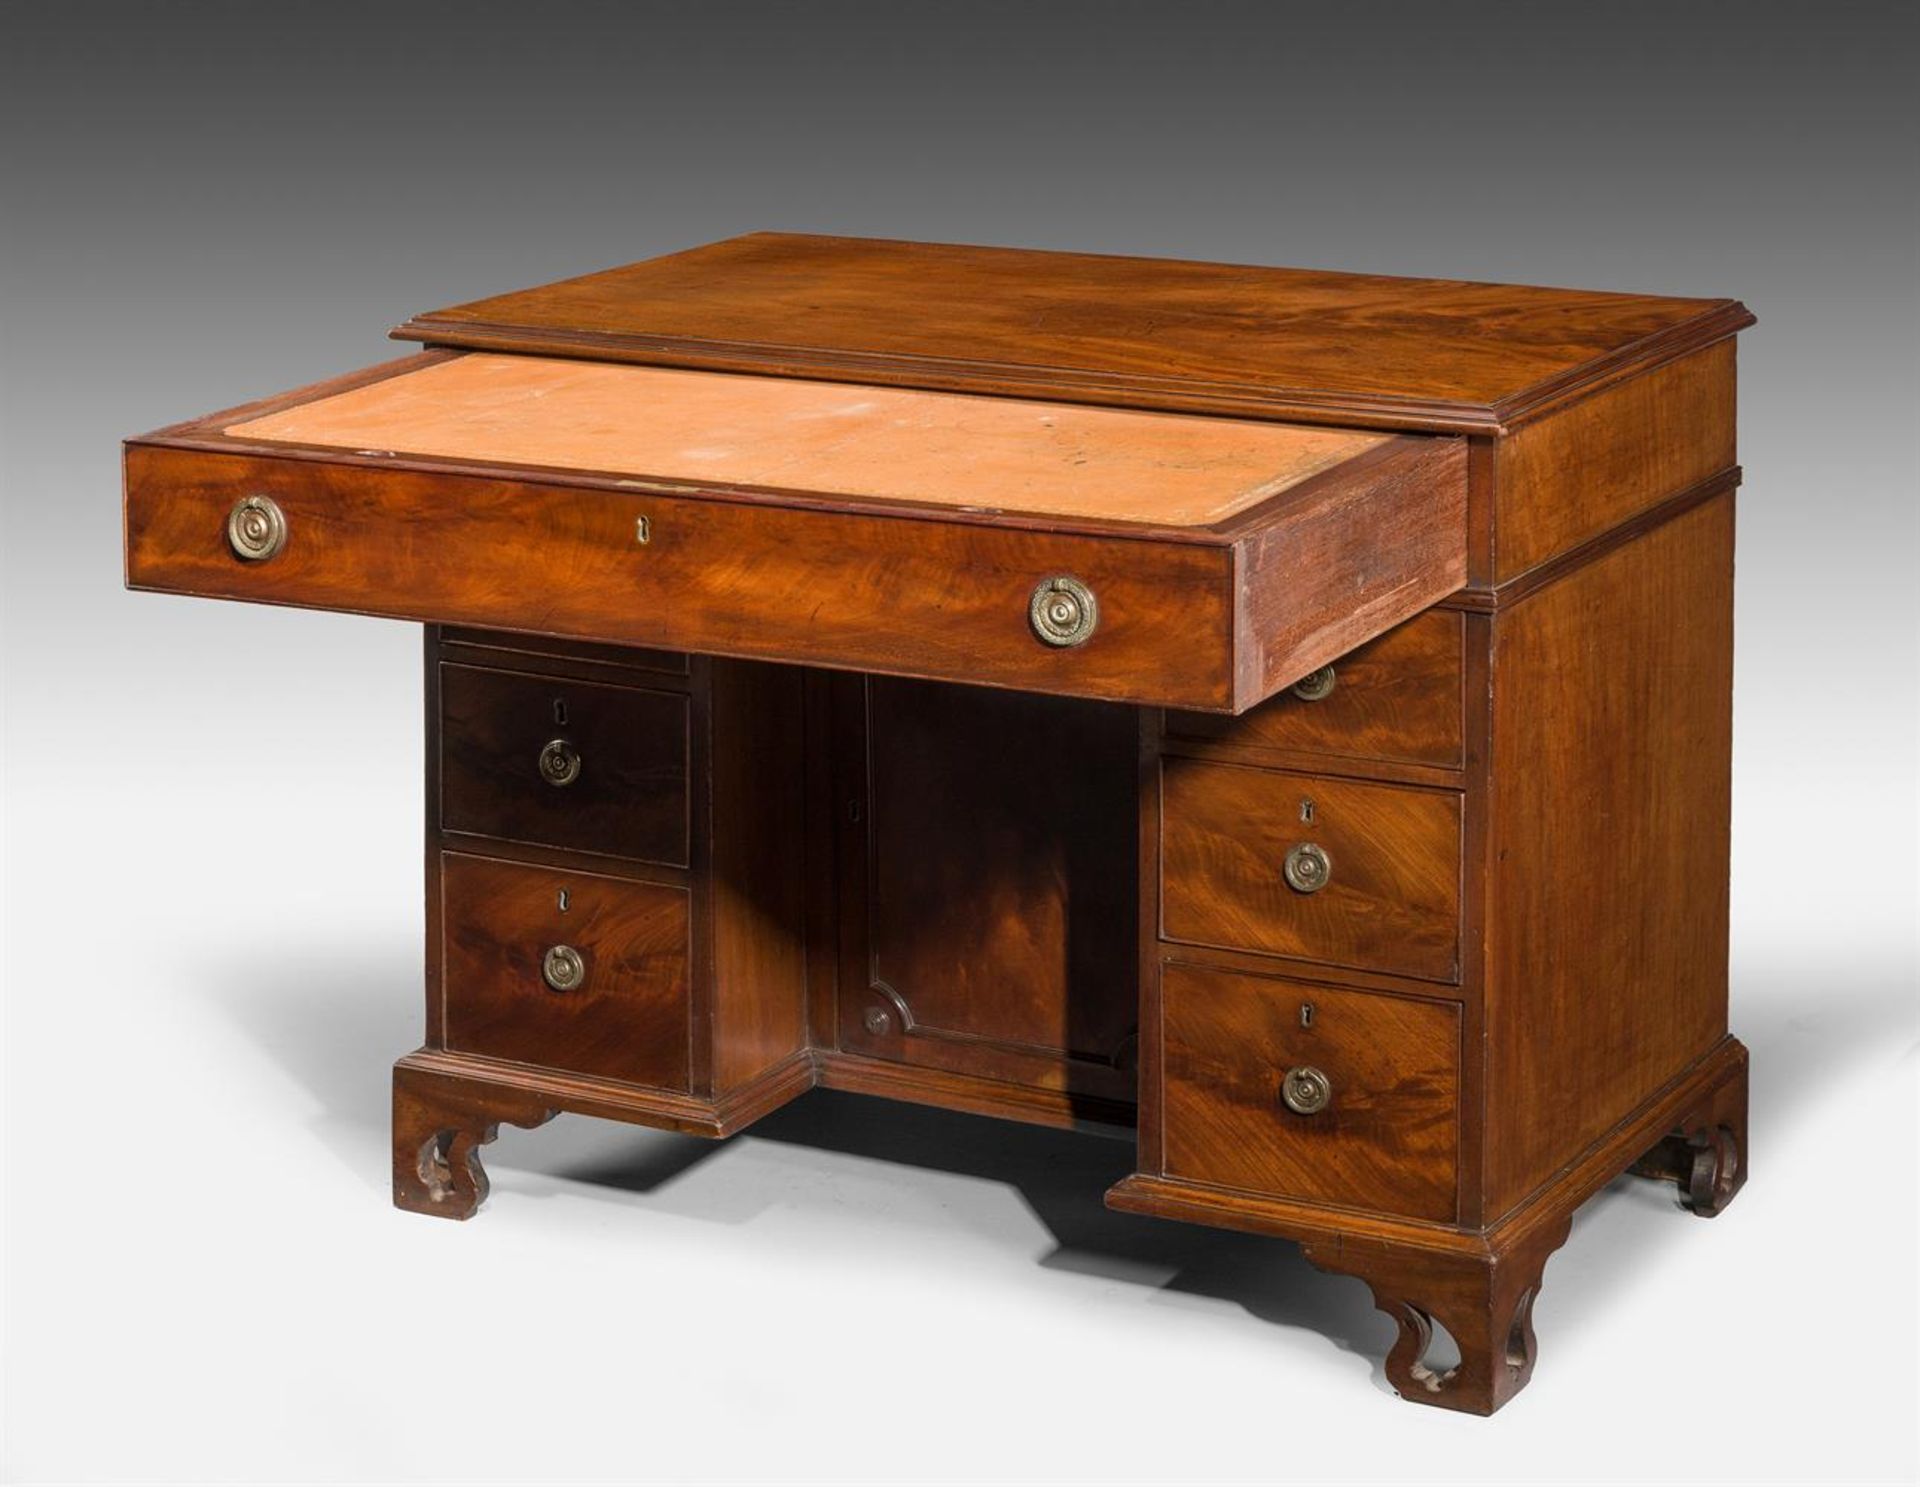 A GEORGE III MAHOGANY KNEEHOLE DESK IN THE MANNER OF THOMAS CHIPPENDALE, CIRCA 1780 - Image 3 of 9